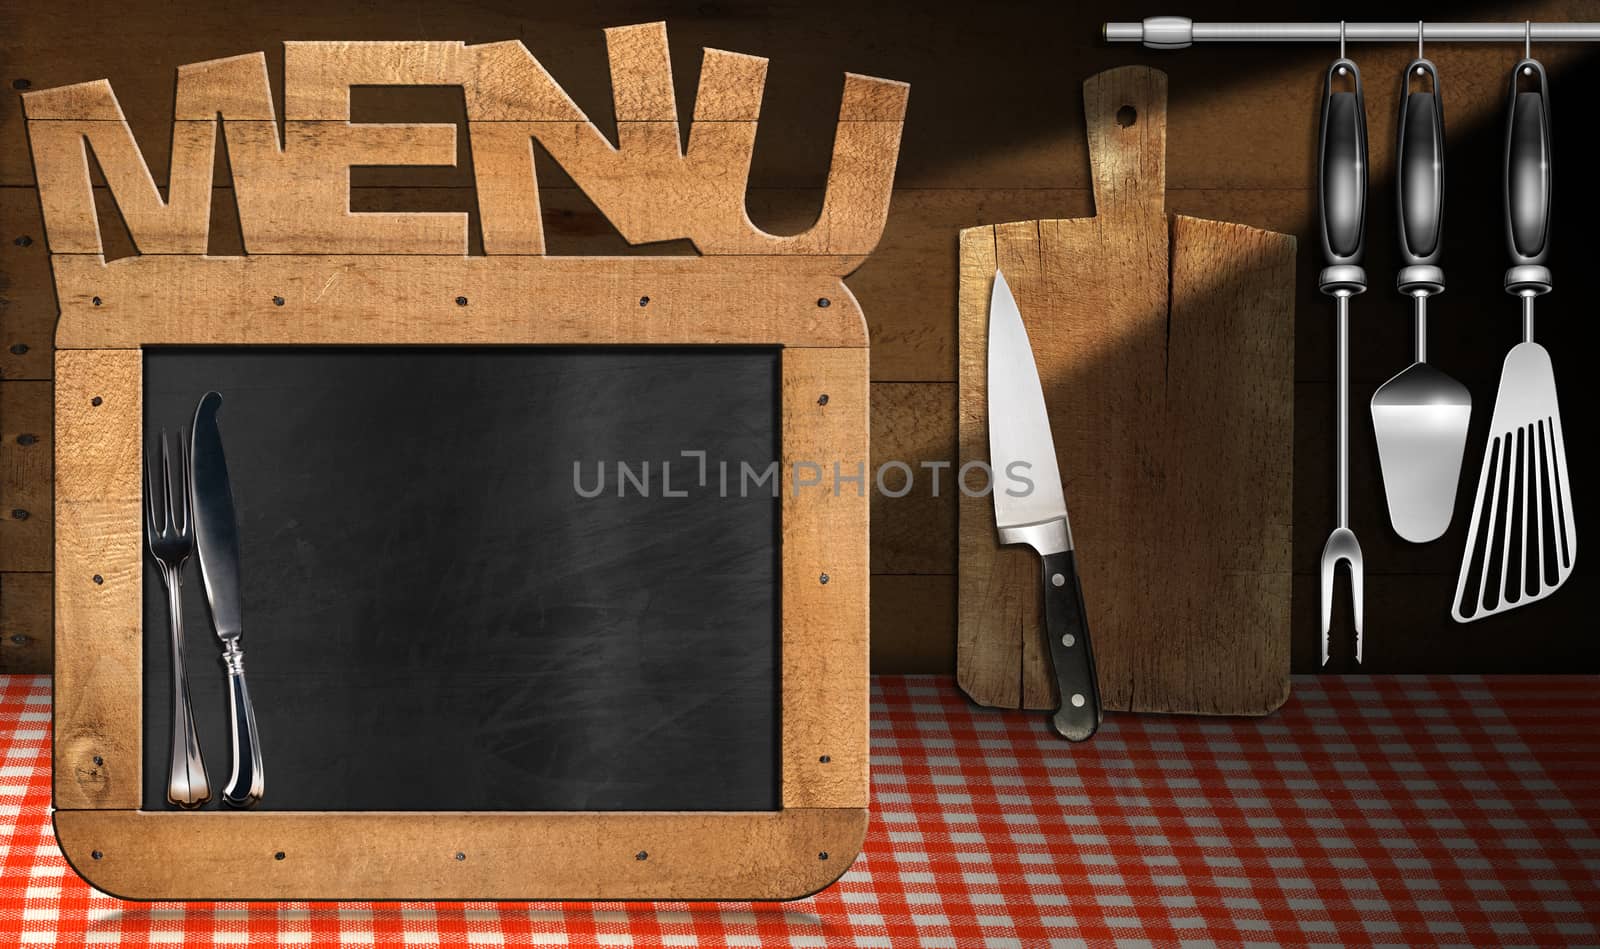 Old empty blackboard with wooden rectangular frame and text Menu in the kitchen with utensils. Template for recipes or food menu